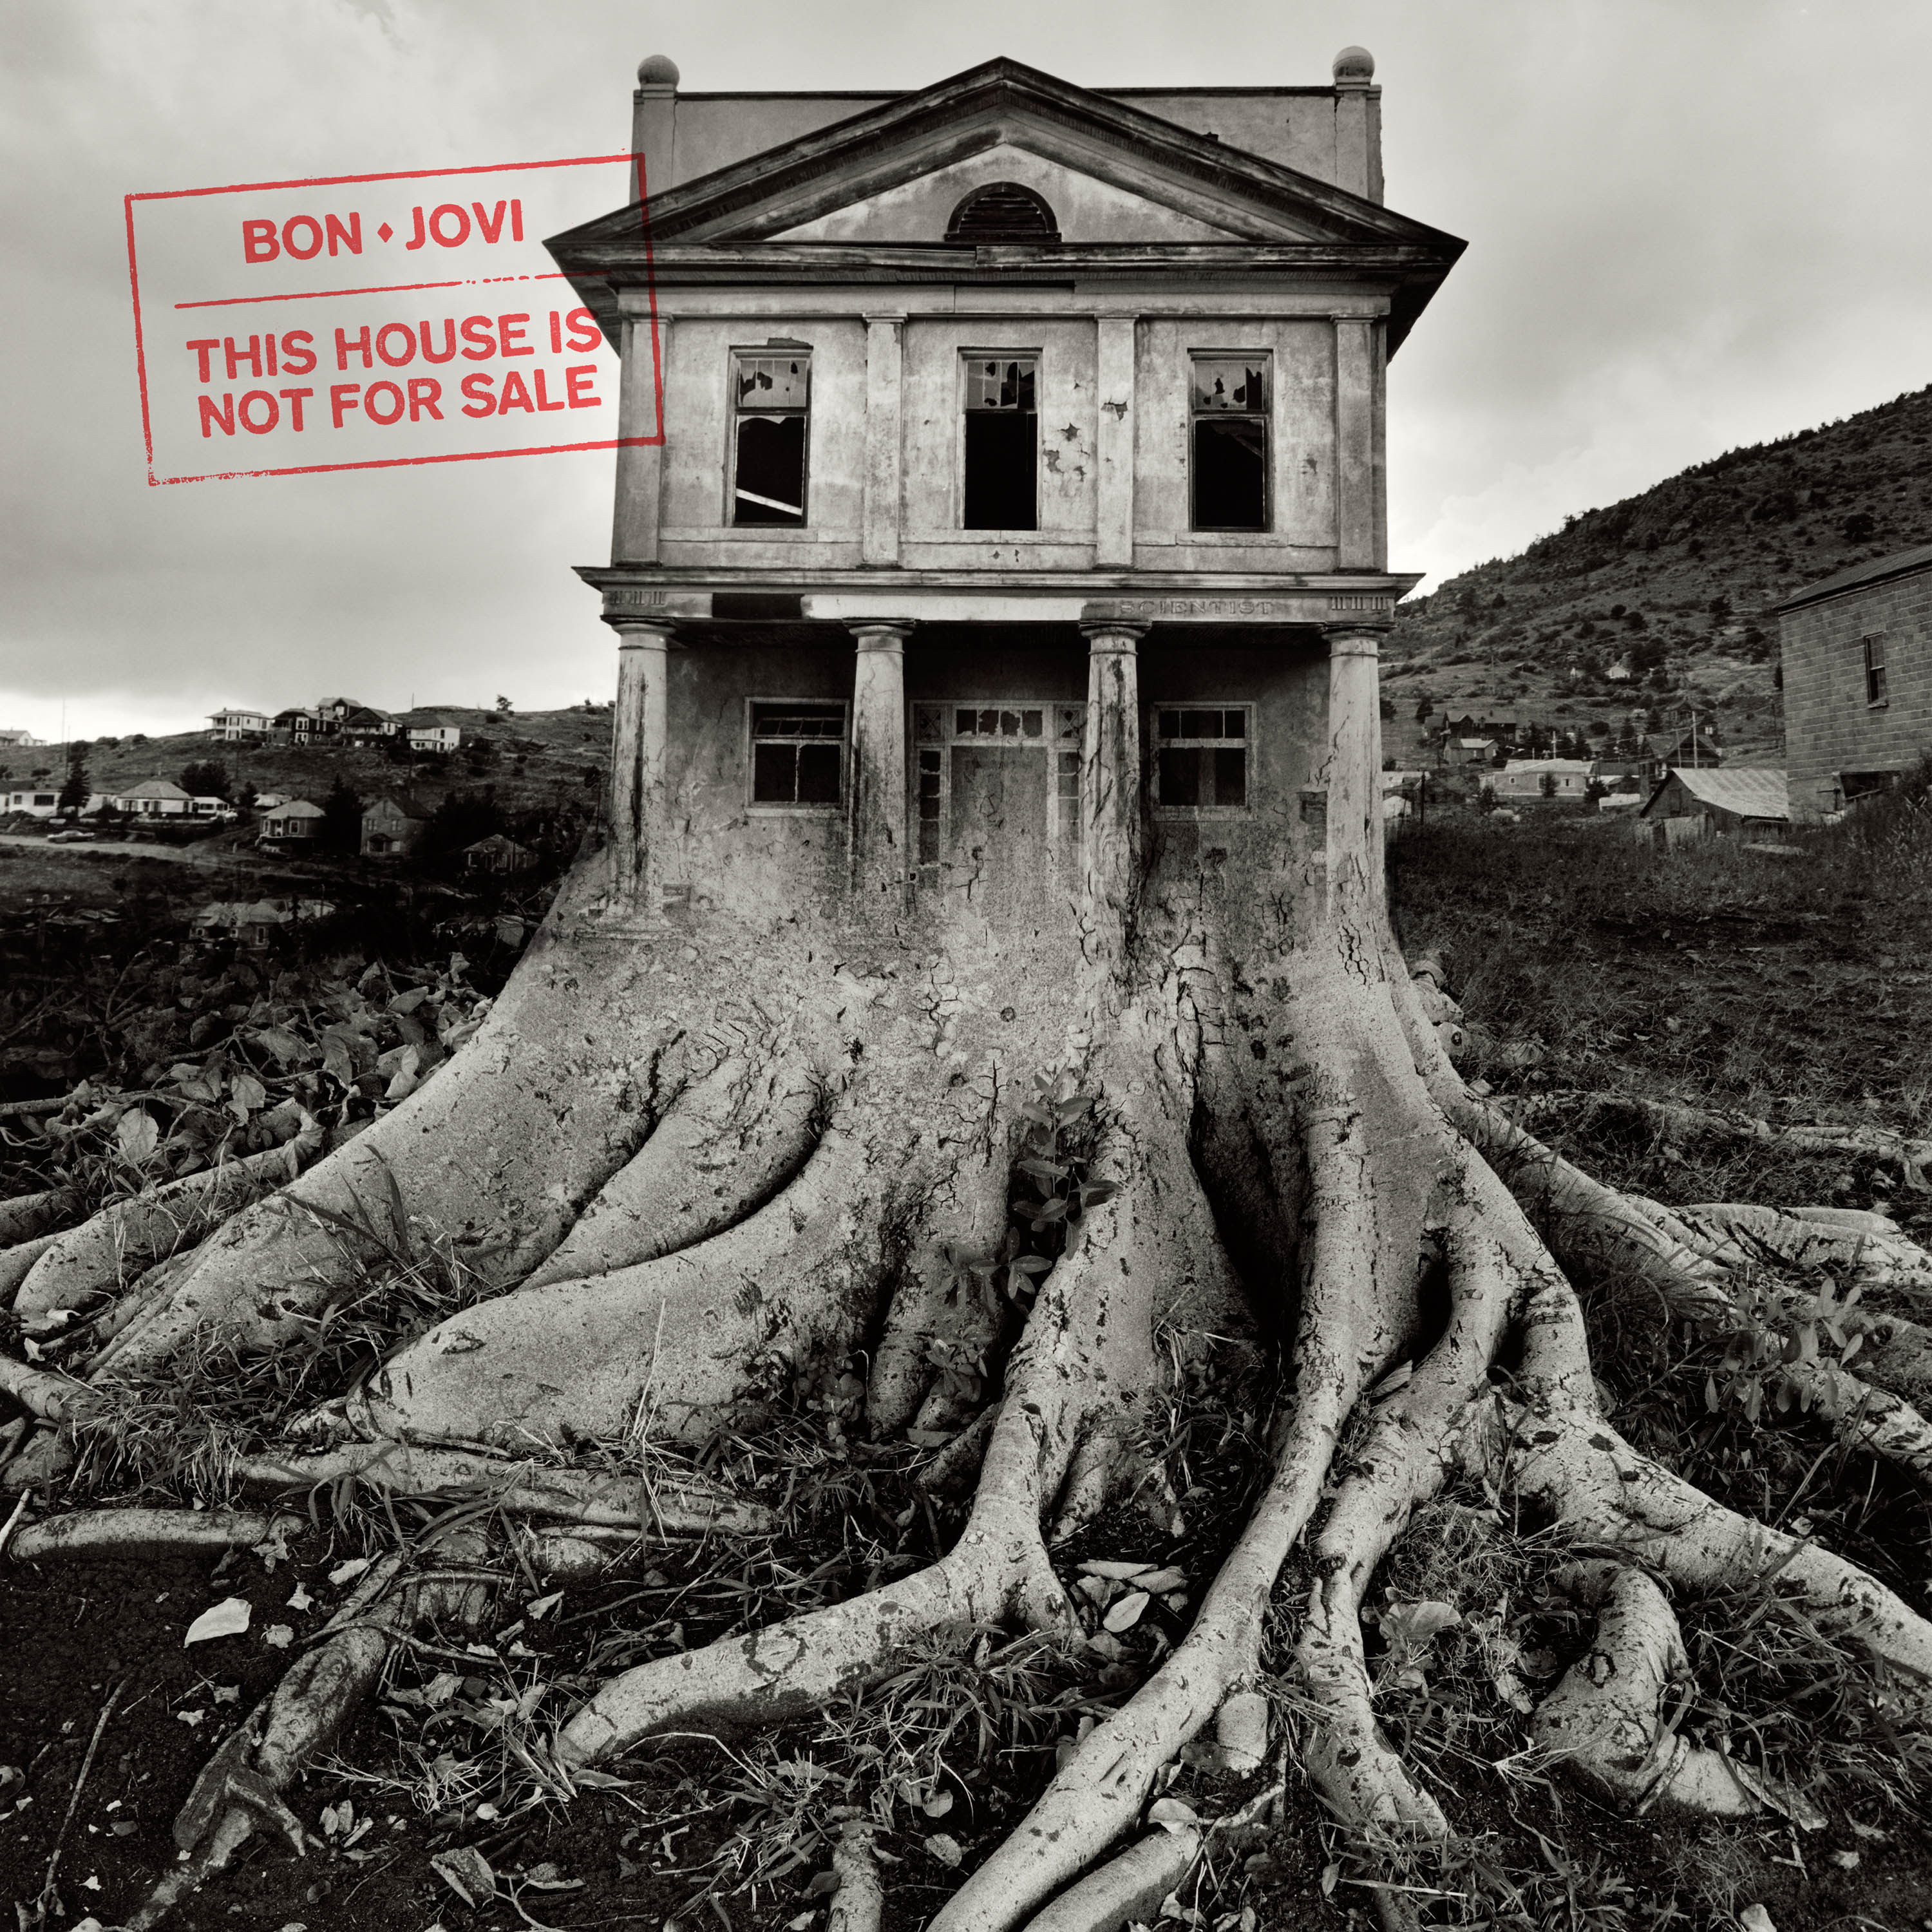 Bon Jovi - Songs) For Sale - Not (CD) This Is House (12